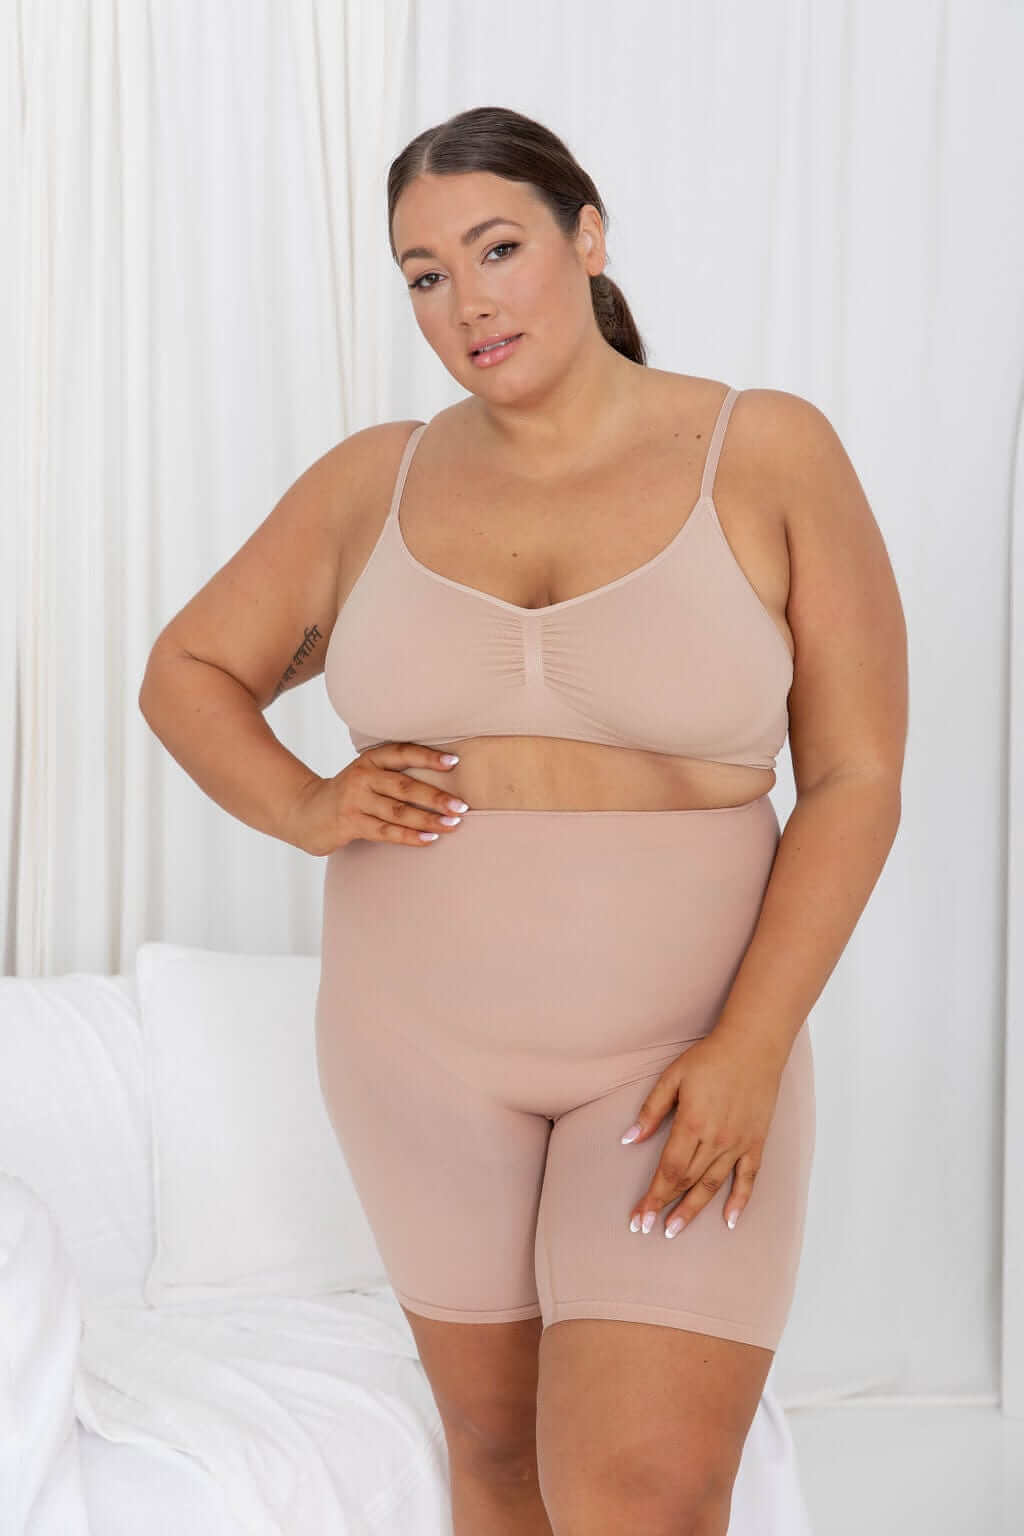 Anti Chaffe Shaping Shorts Nude - $38.00 - Bodysuit - Naked Curve